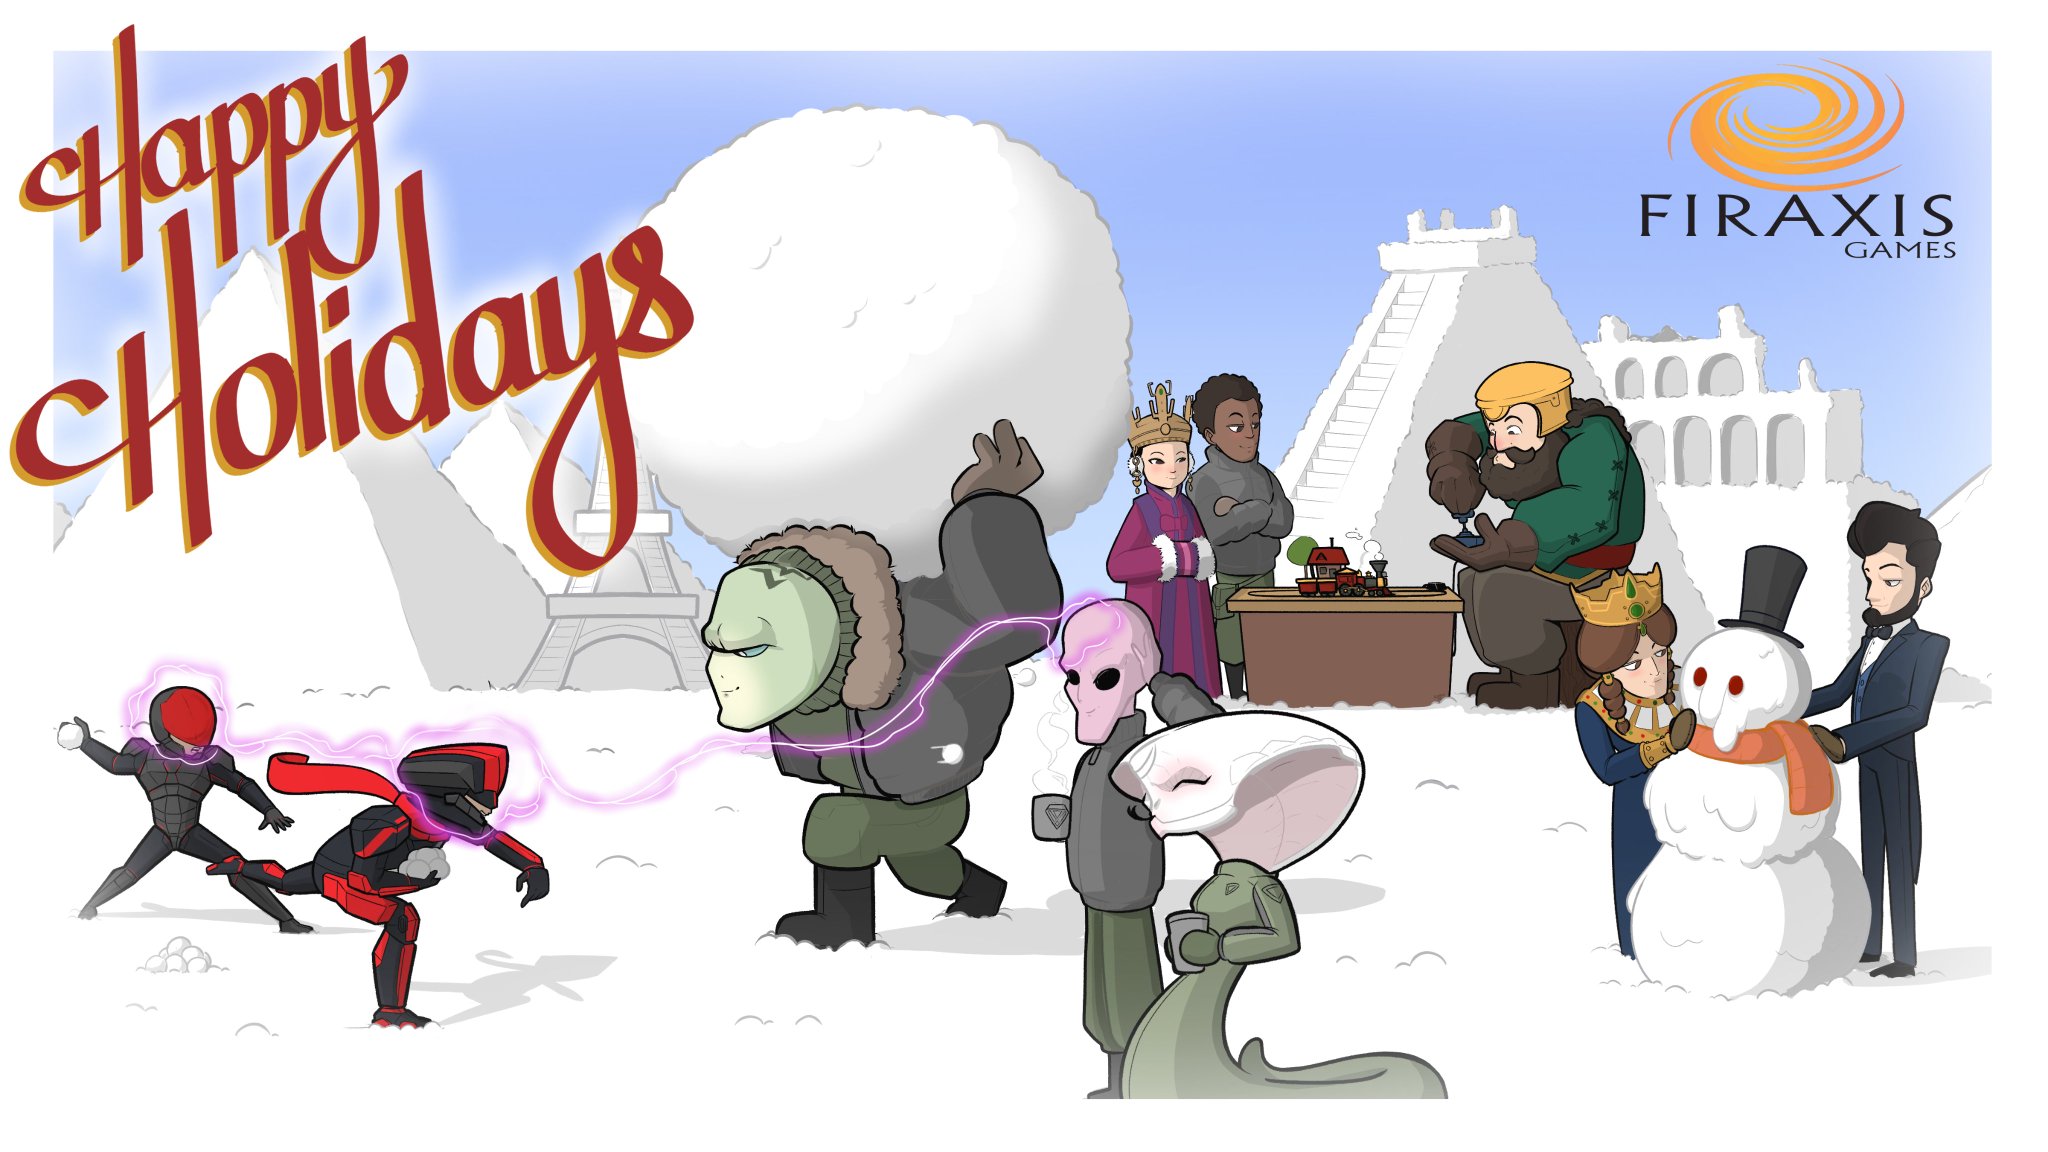 Holiday greetings from Firaxis (2022)